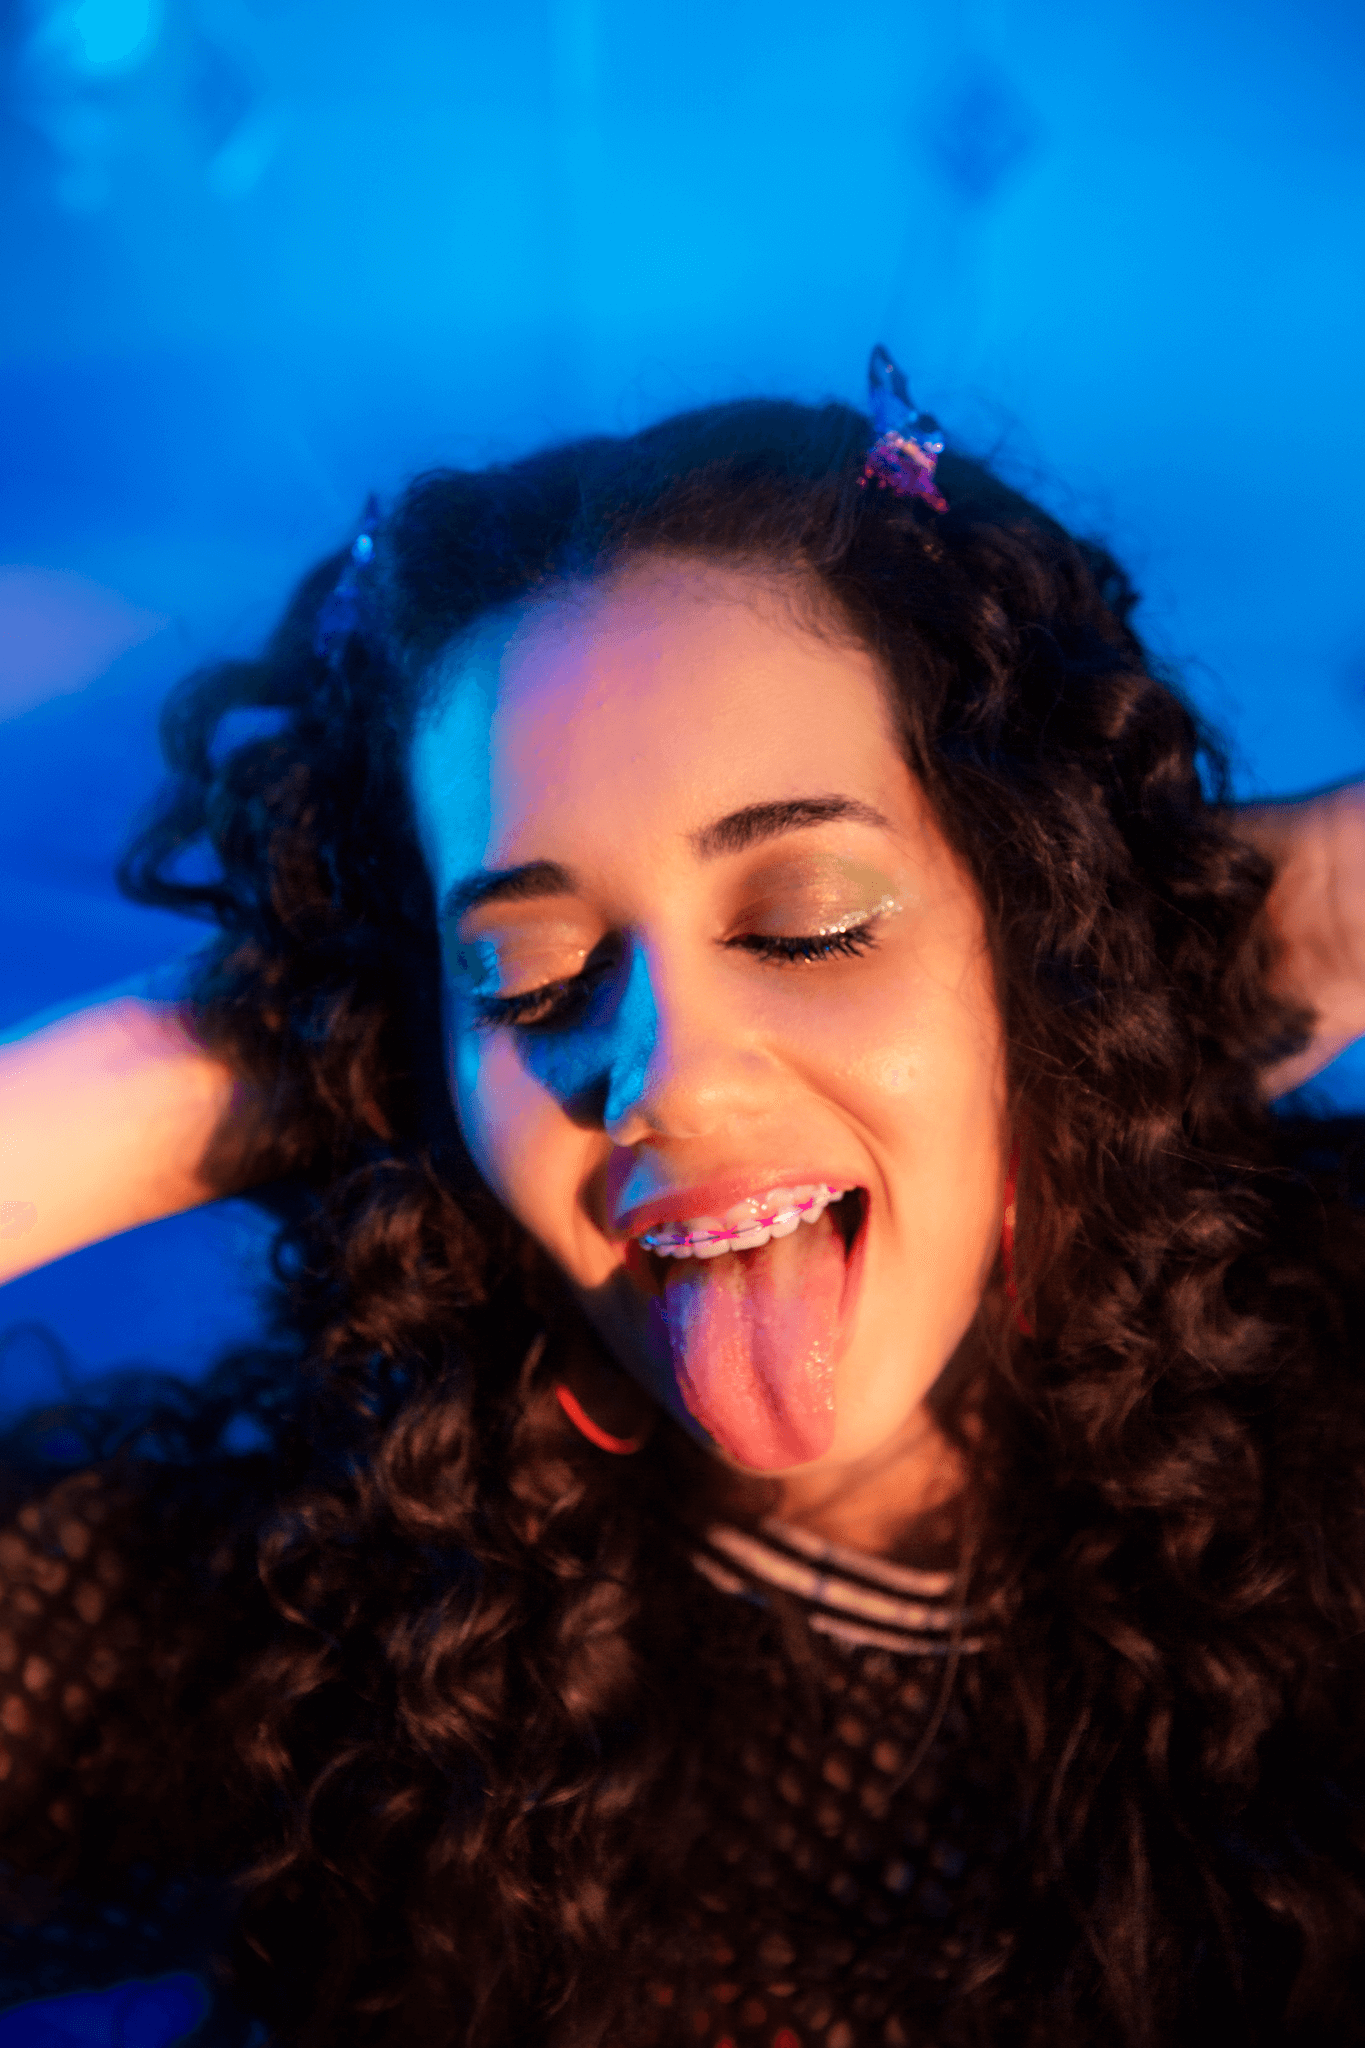 A young woman with long curly hair sticks out her tongue puts her hand behind her head to relax.